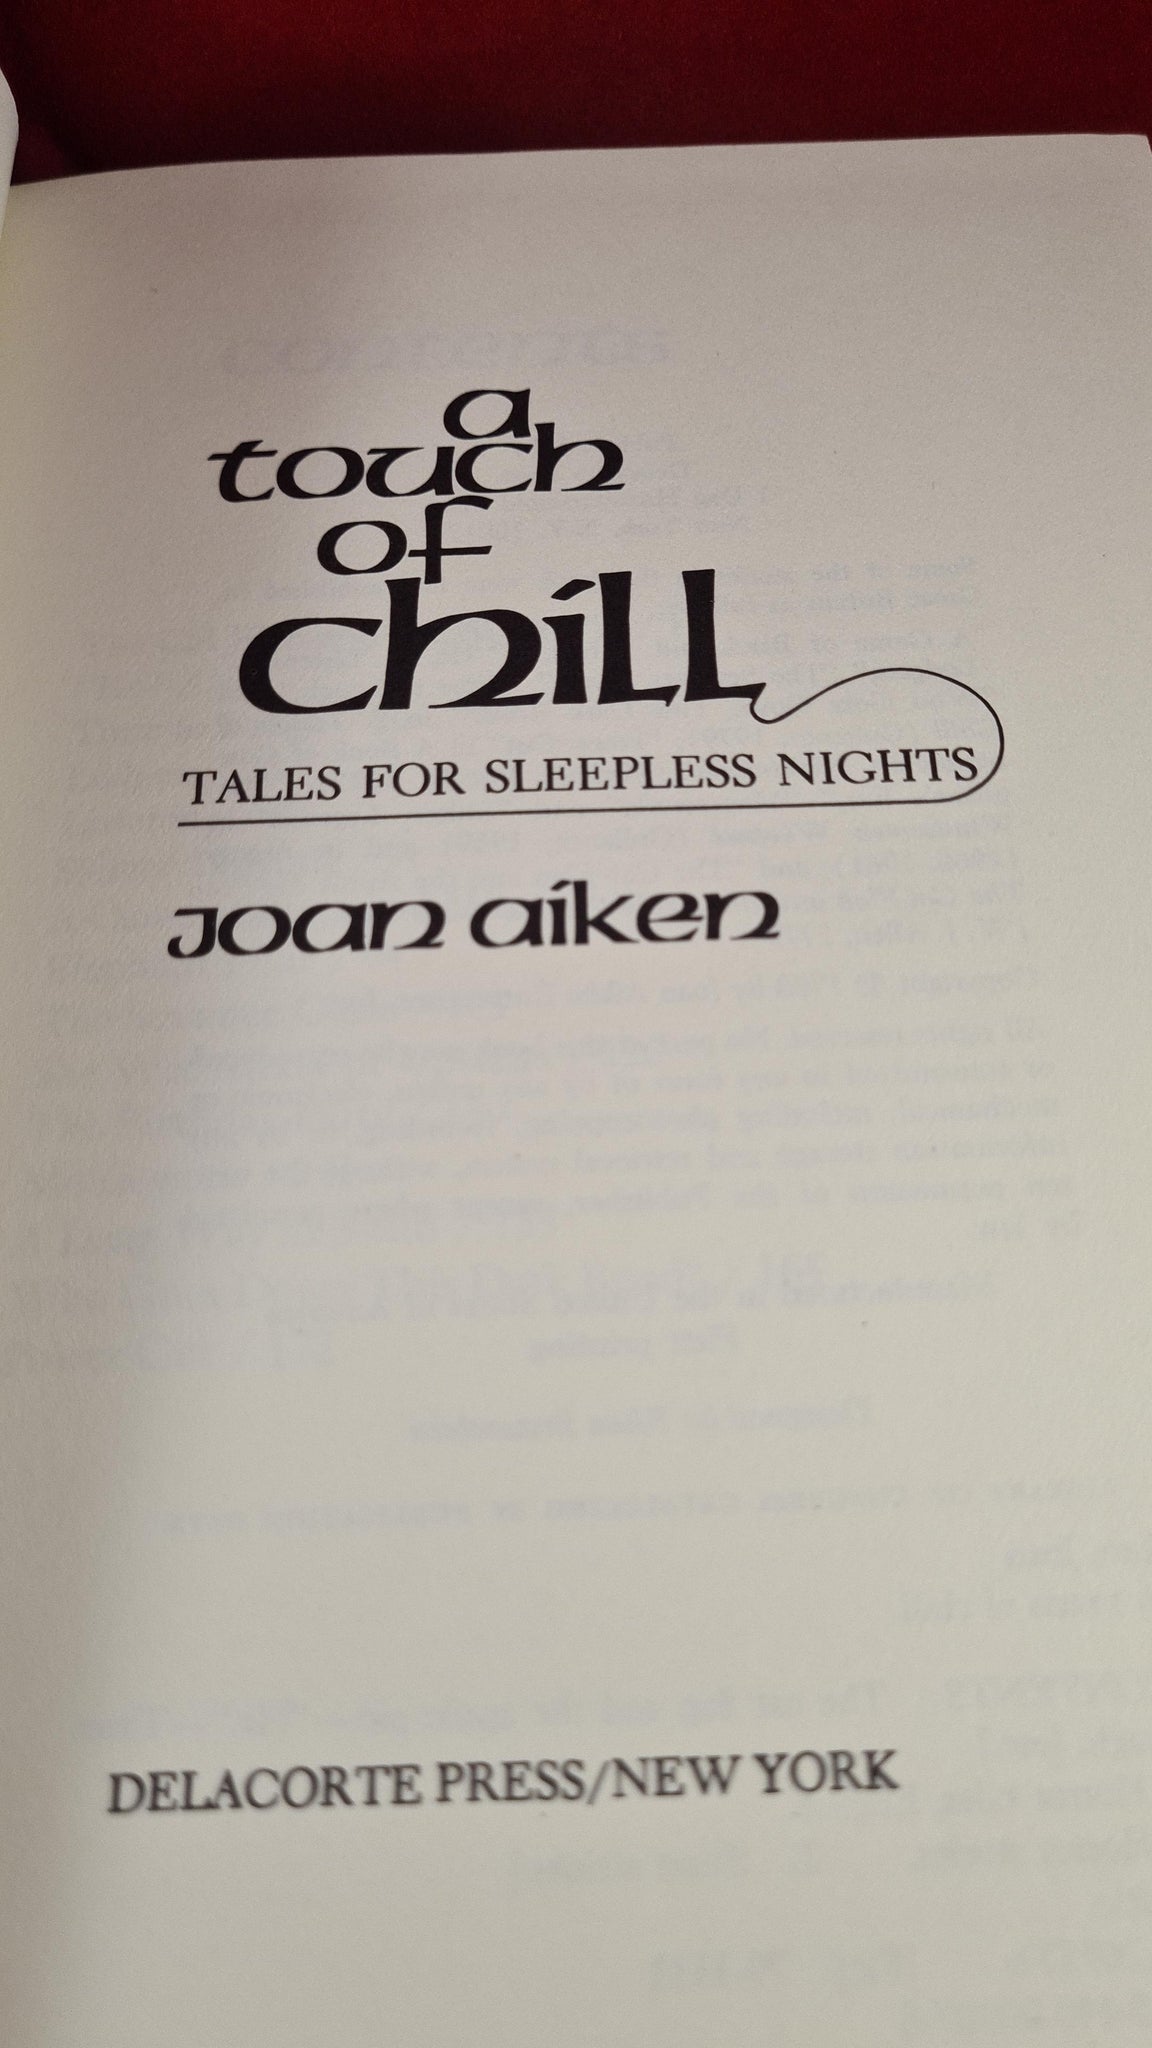 A Touch of Chill by Joan Aiken